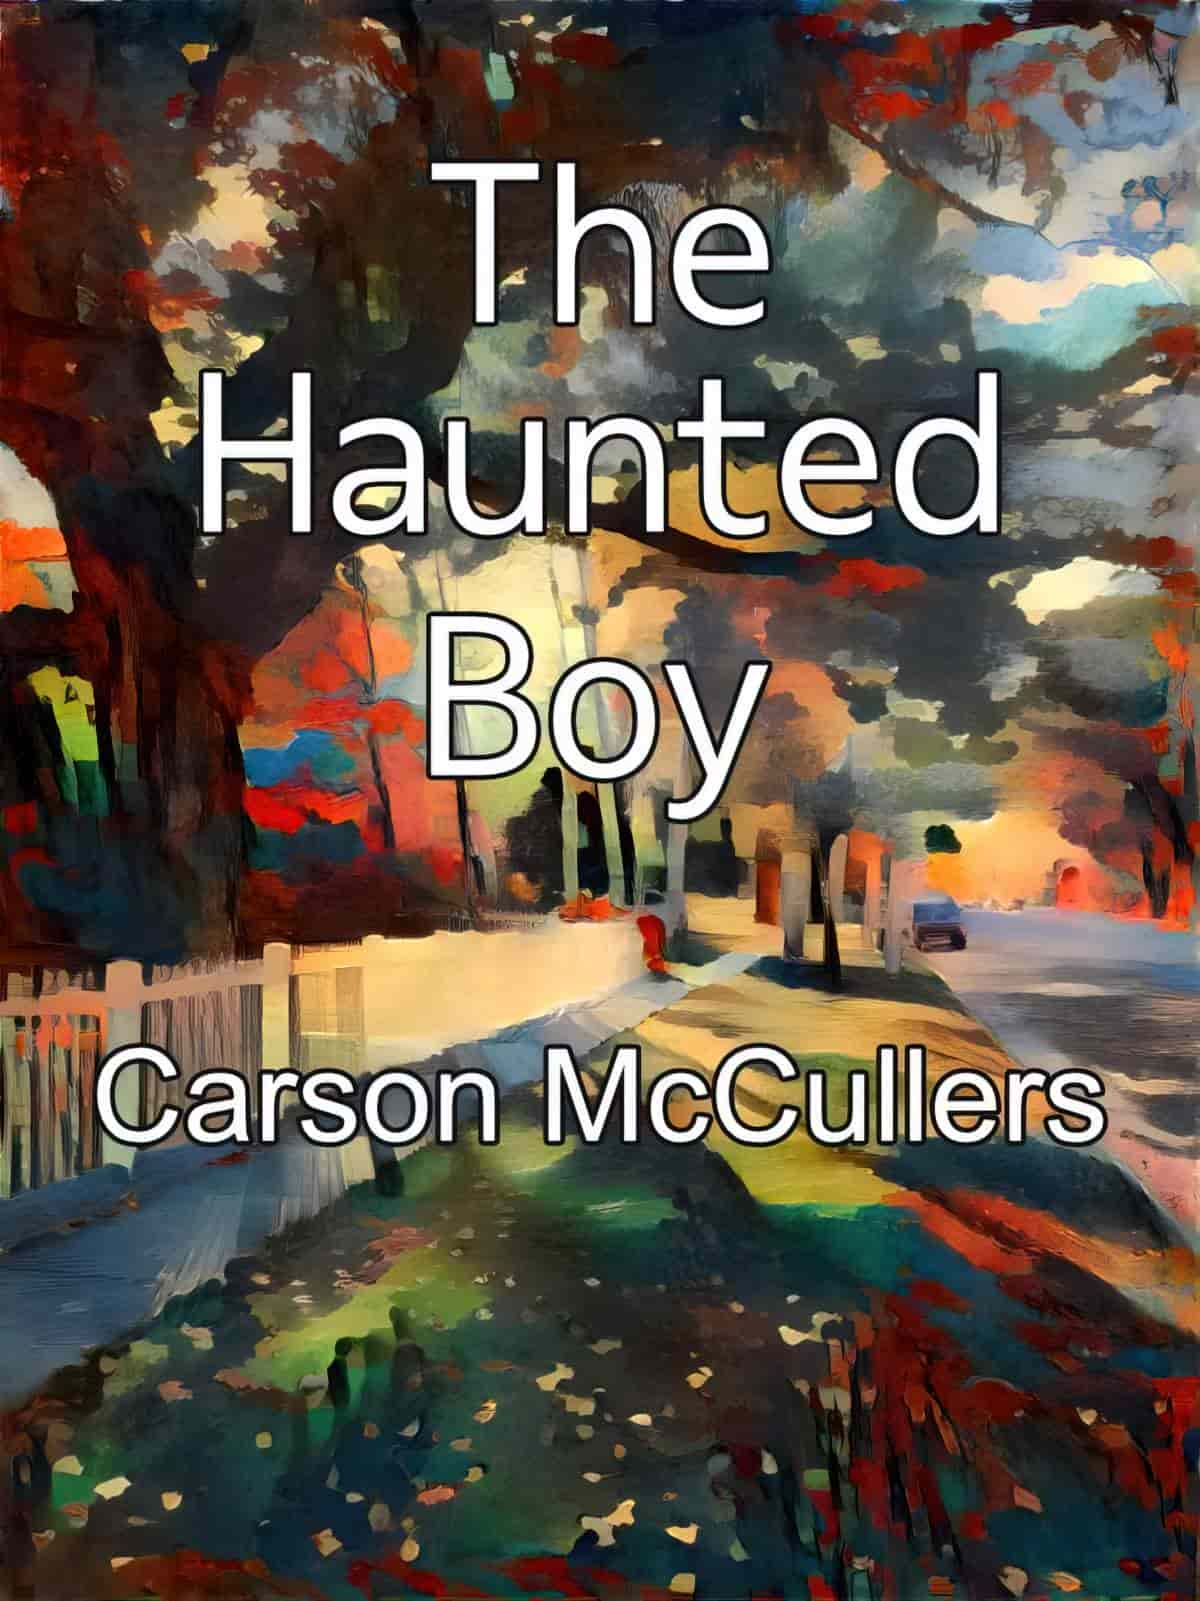 The Haunted Boy Short Story by Carson McCullers Analysis